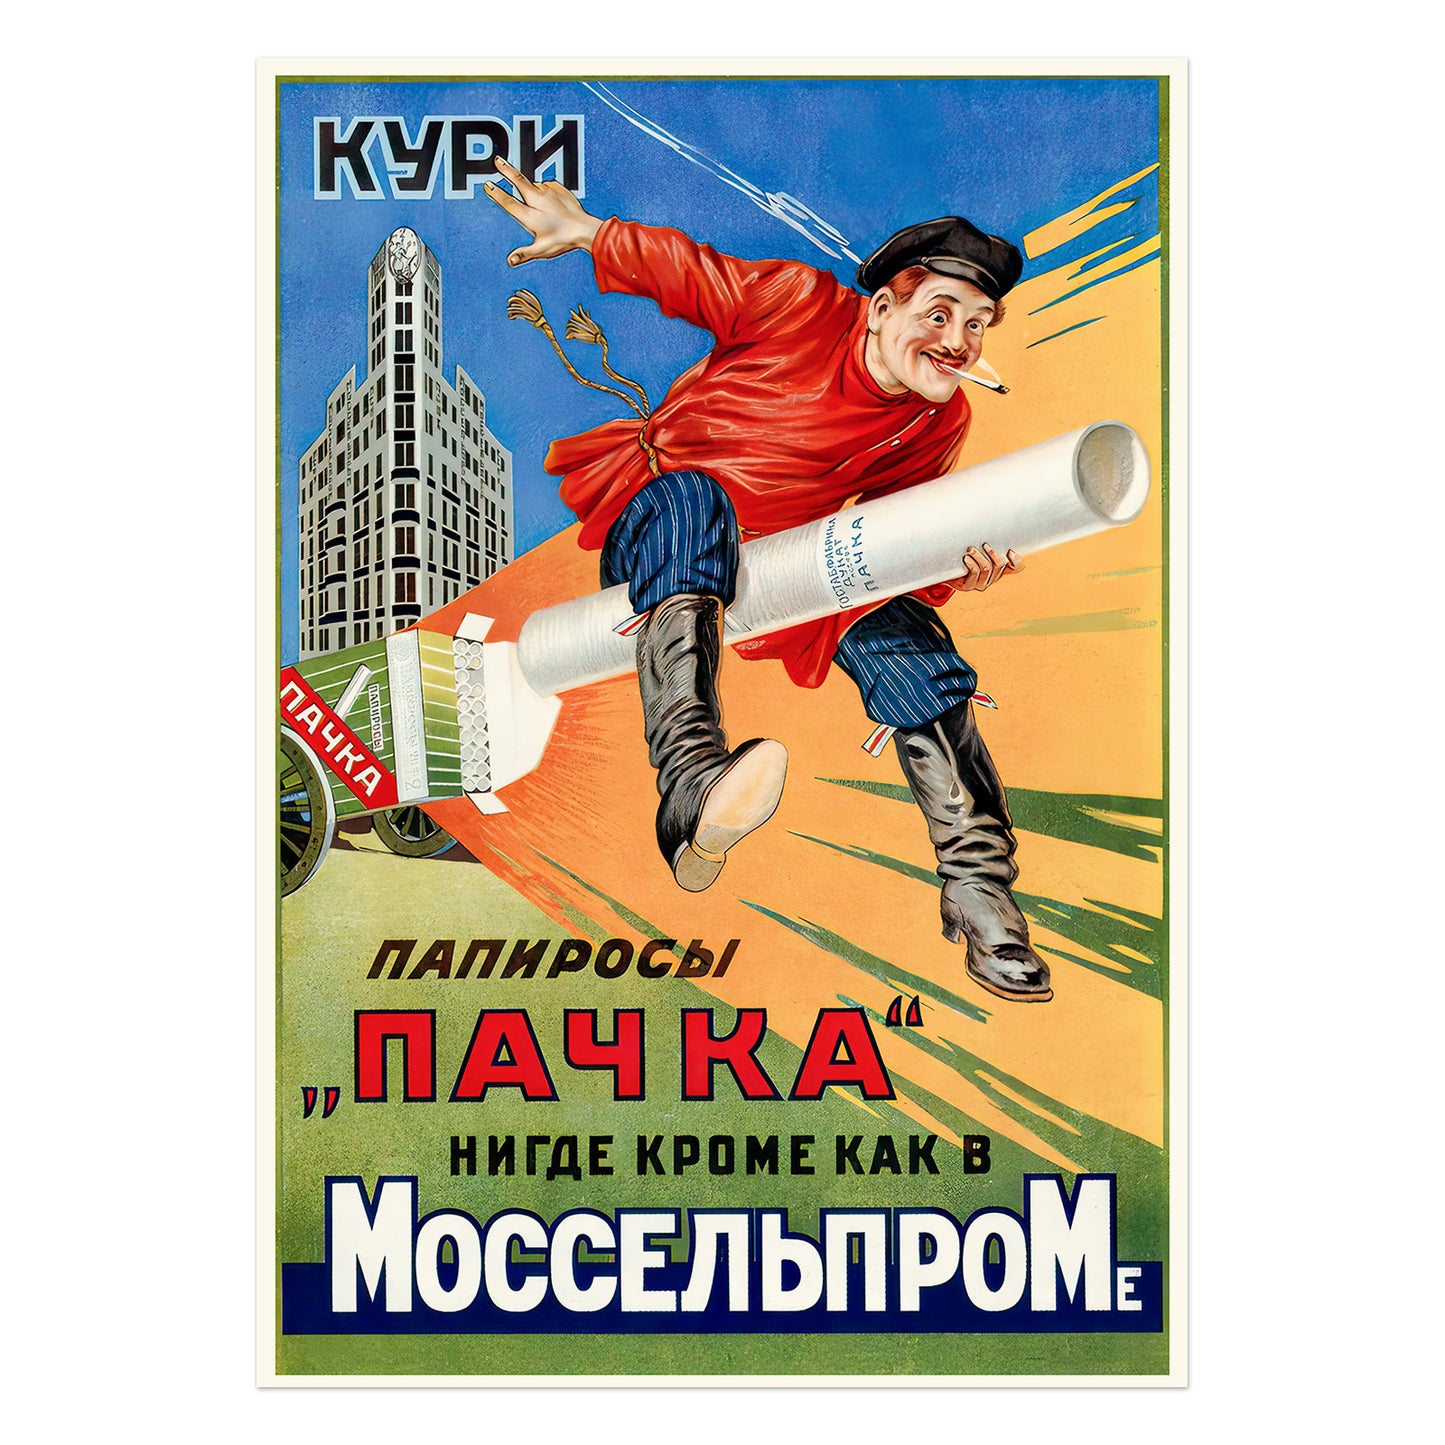 Advertising poster for Russian Pachka cigarettes, 1927